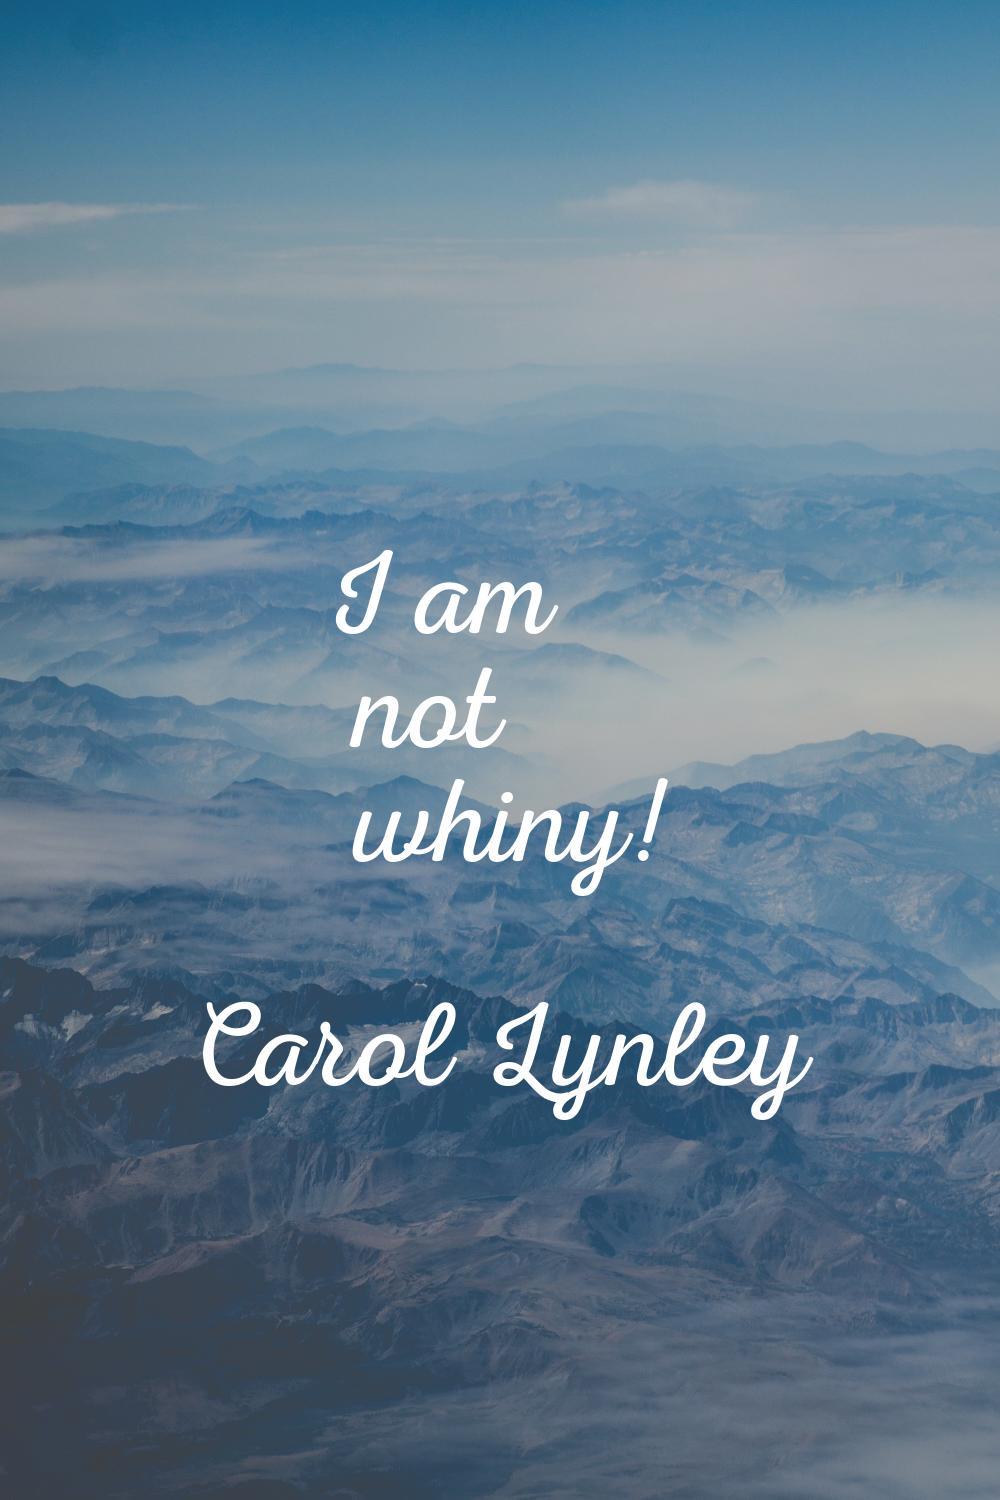 I am not whiny!